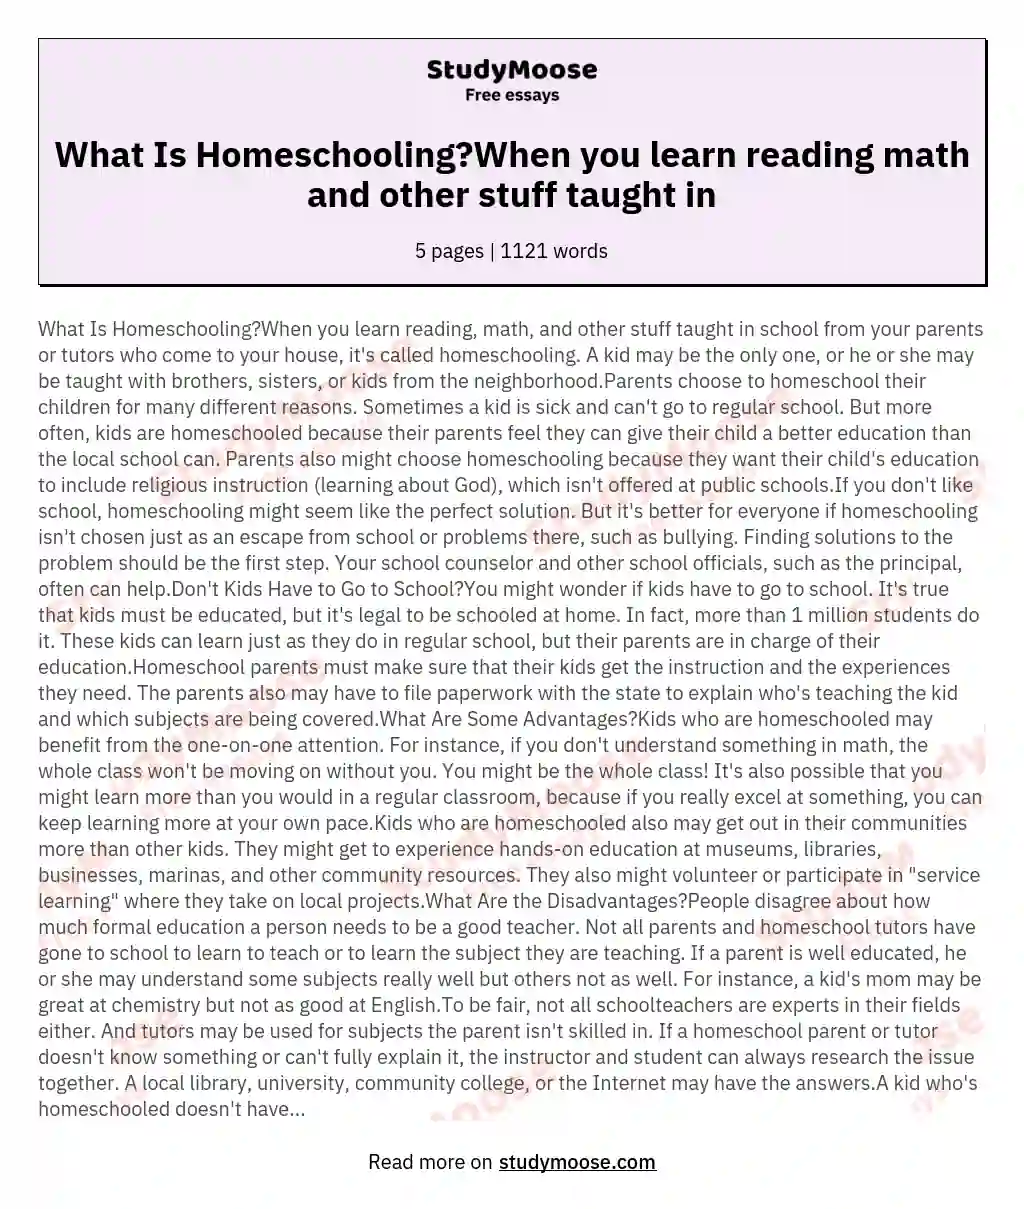 What Is Homeschooling?When you learn reading math and other stuff taught in